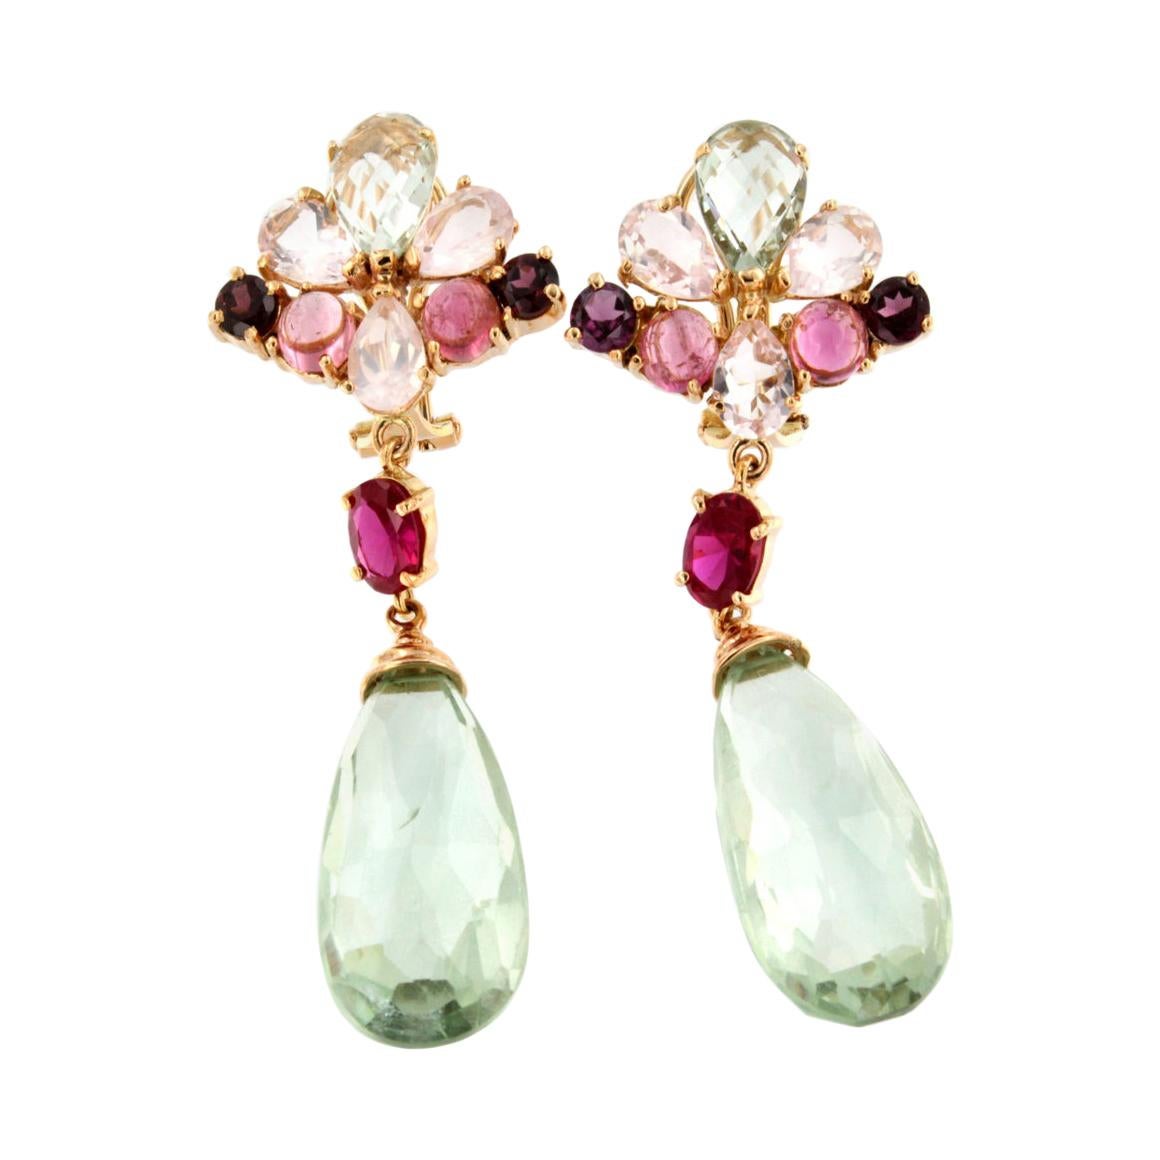 18Kt Rose Gold with Prasiolite Pink Quartz and Pink Tourmaline Earrings